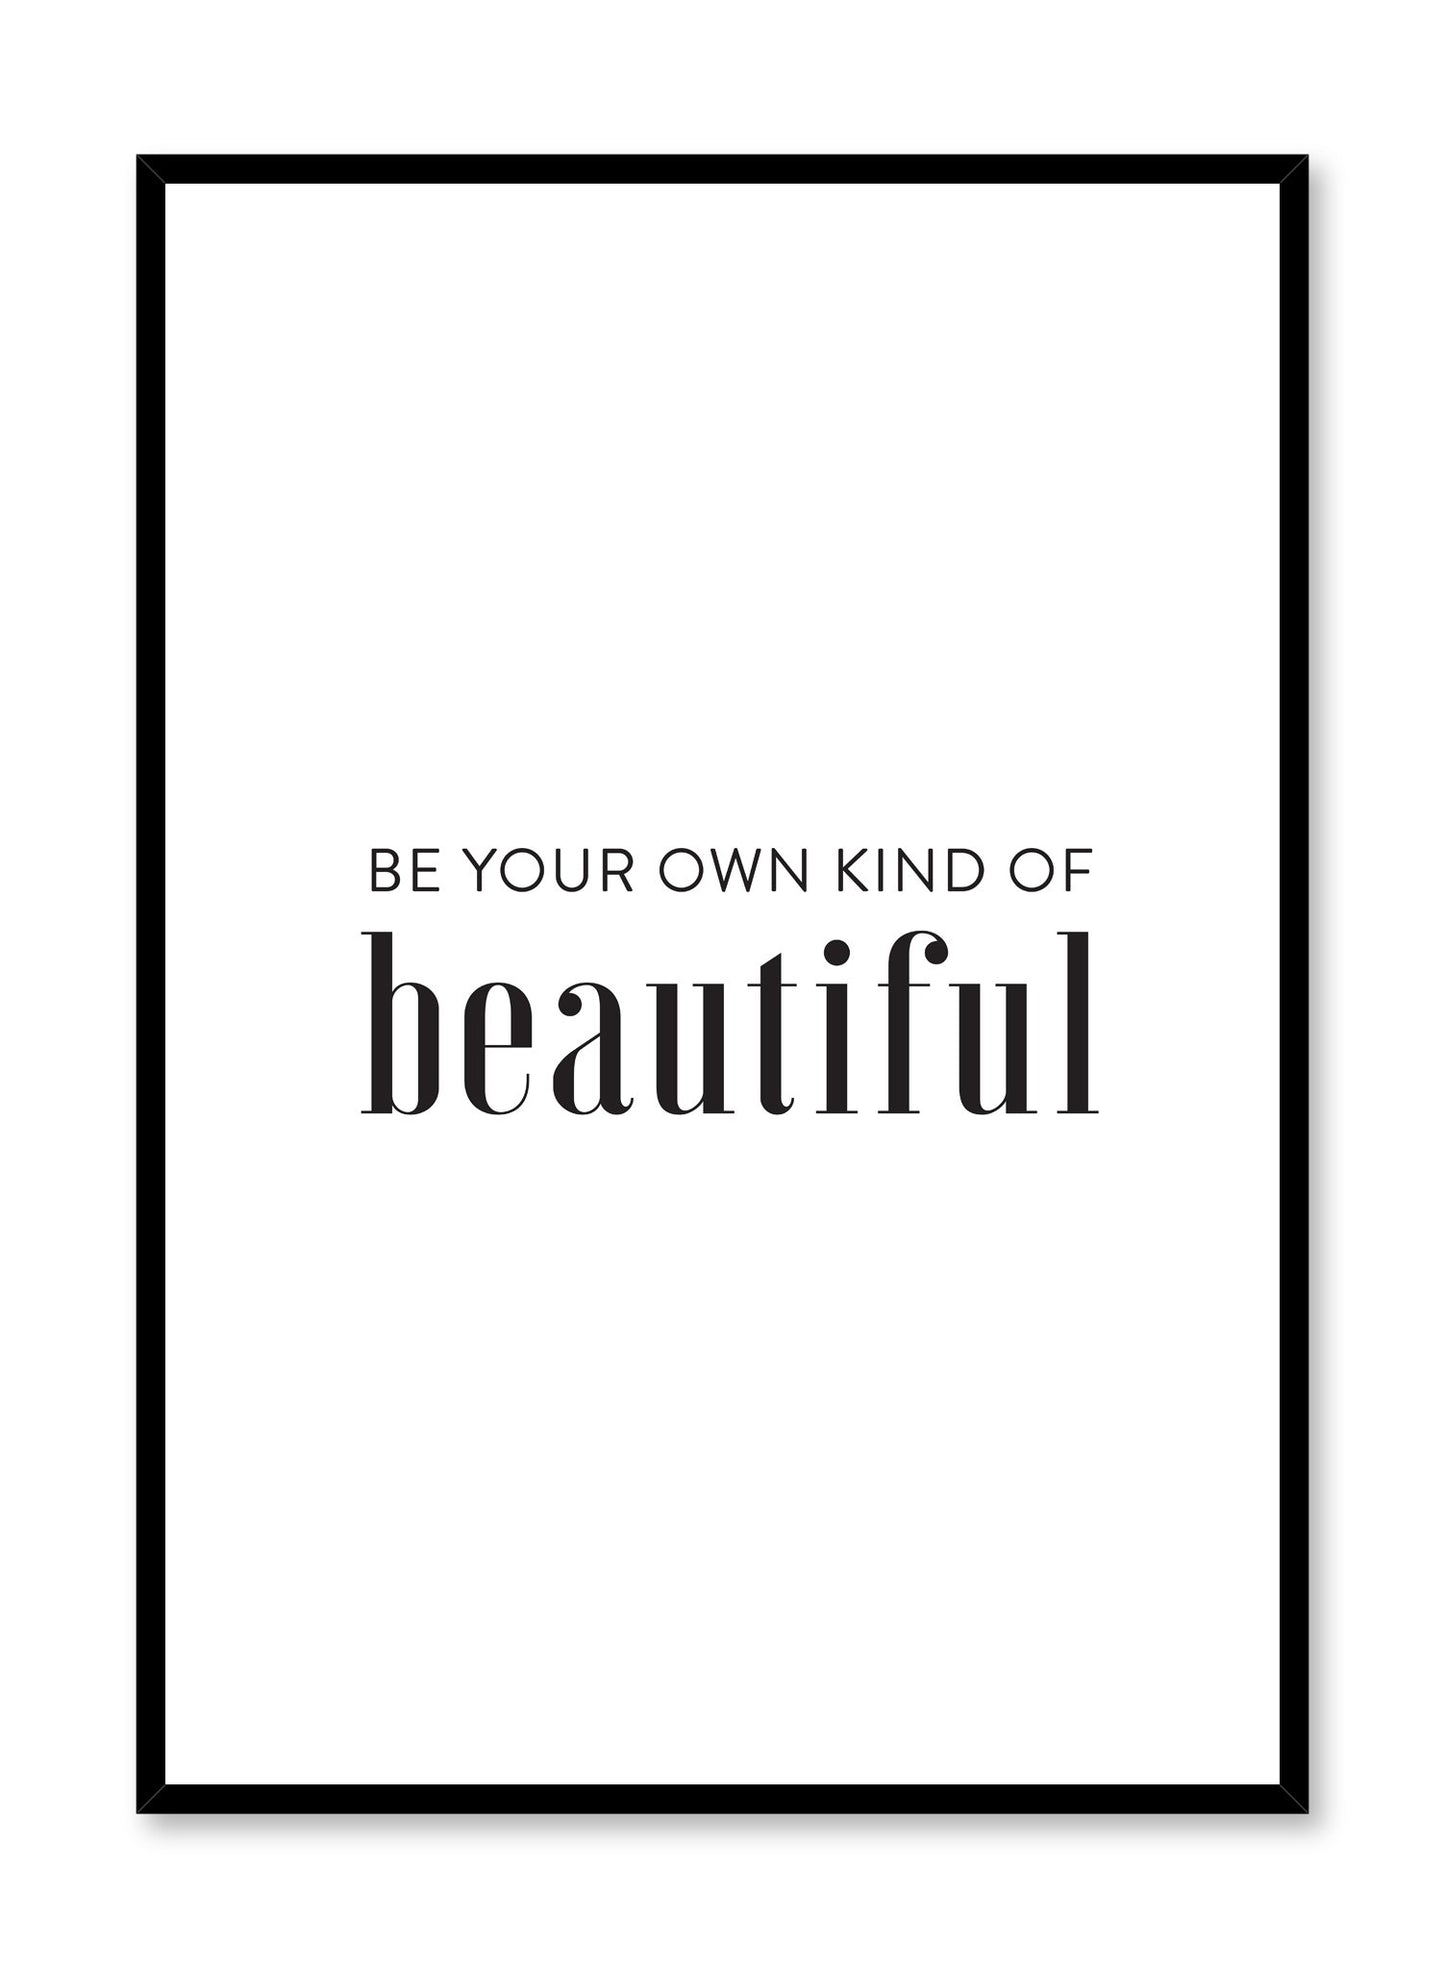 Scandinavian poster with black and white graphic typography design of be your own kind of beautiful by Opposite Wall